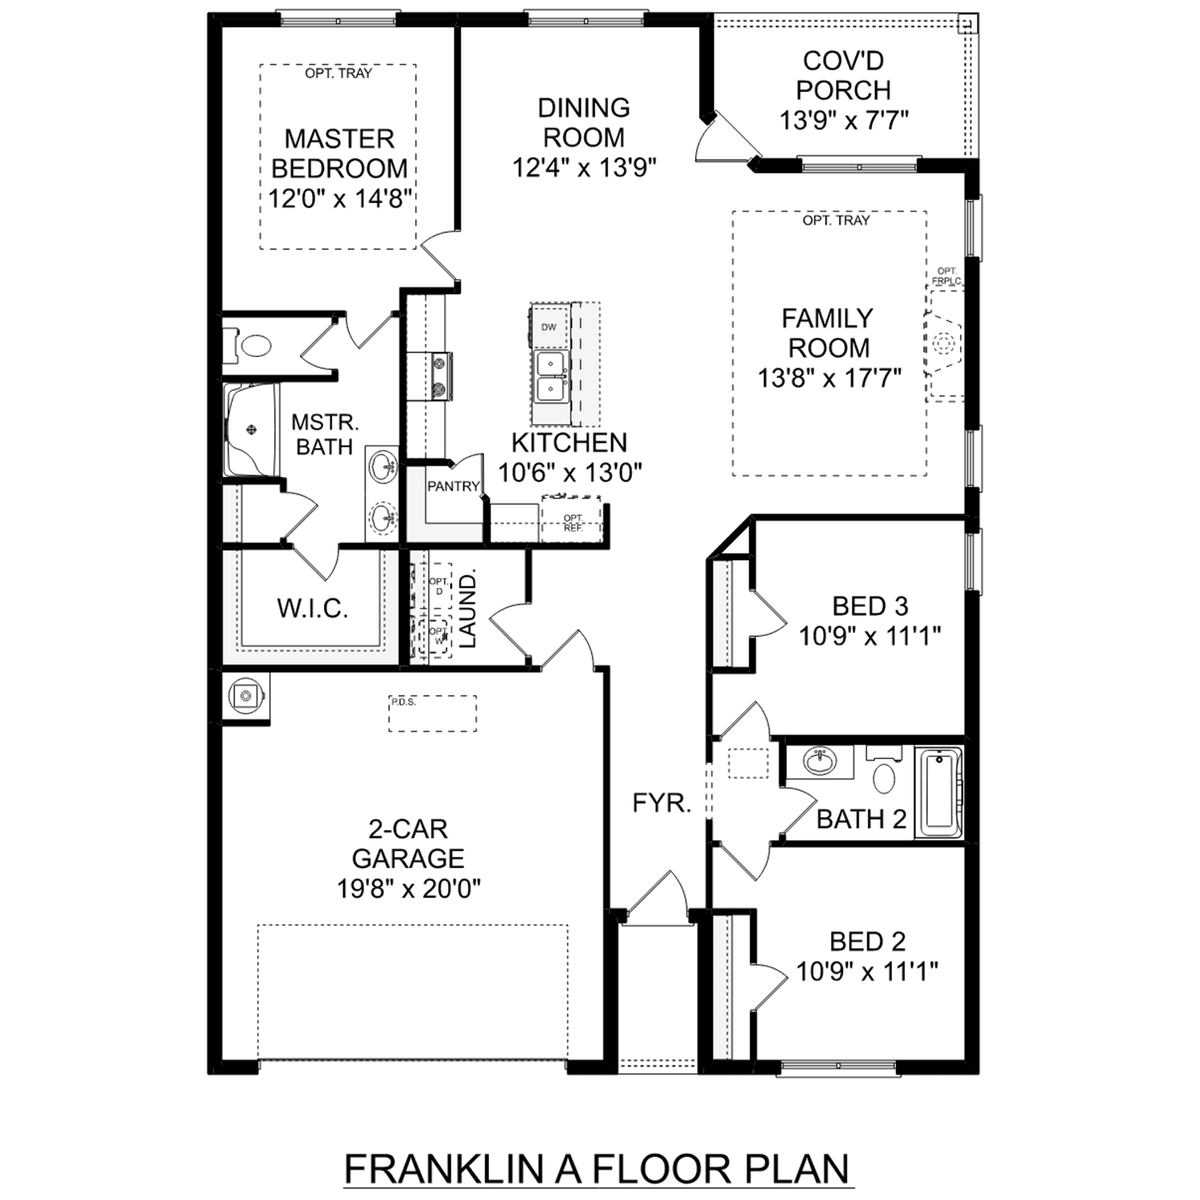 1 - The Franklin floor plan layout for 109 Hazel Pine Trail in Davidson Homes' Clearview community.